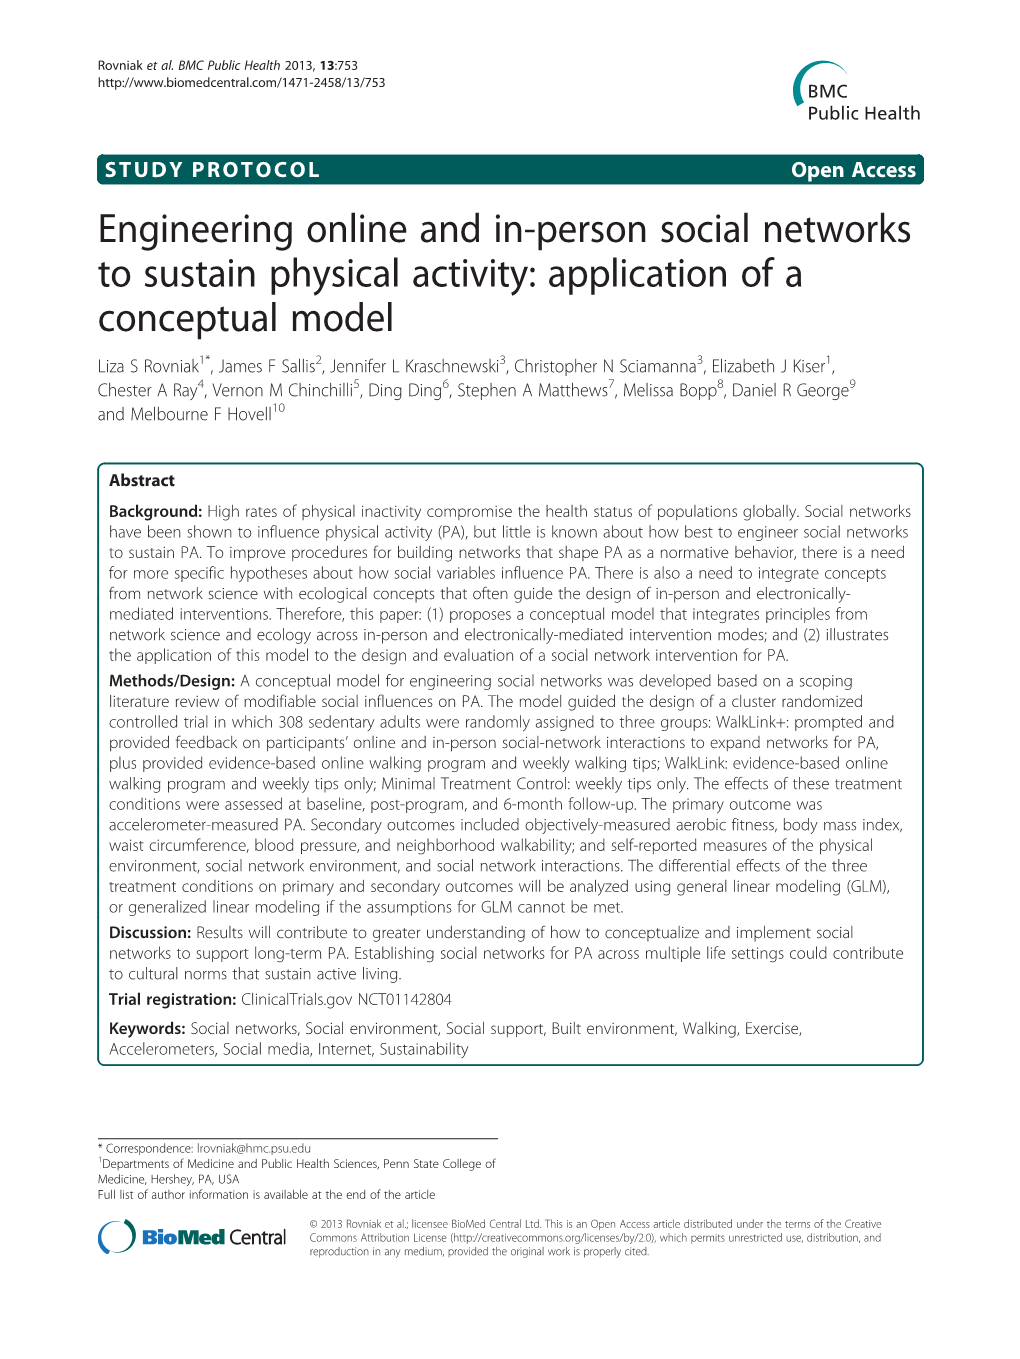 Engineering Online and In-Person Social Networks to Sustain Physical Activity